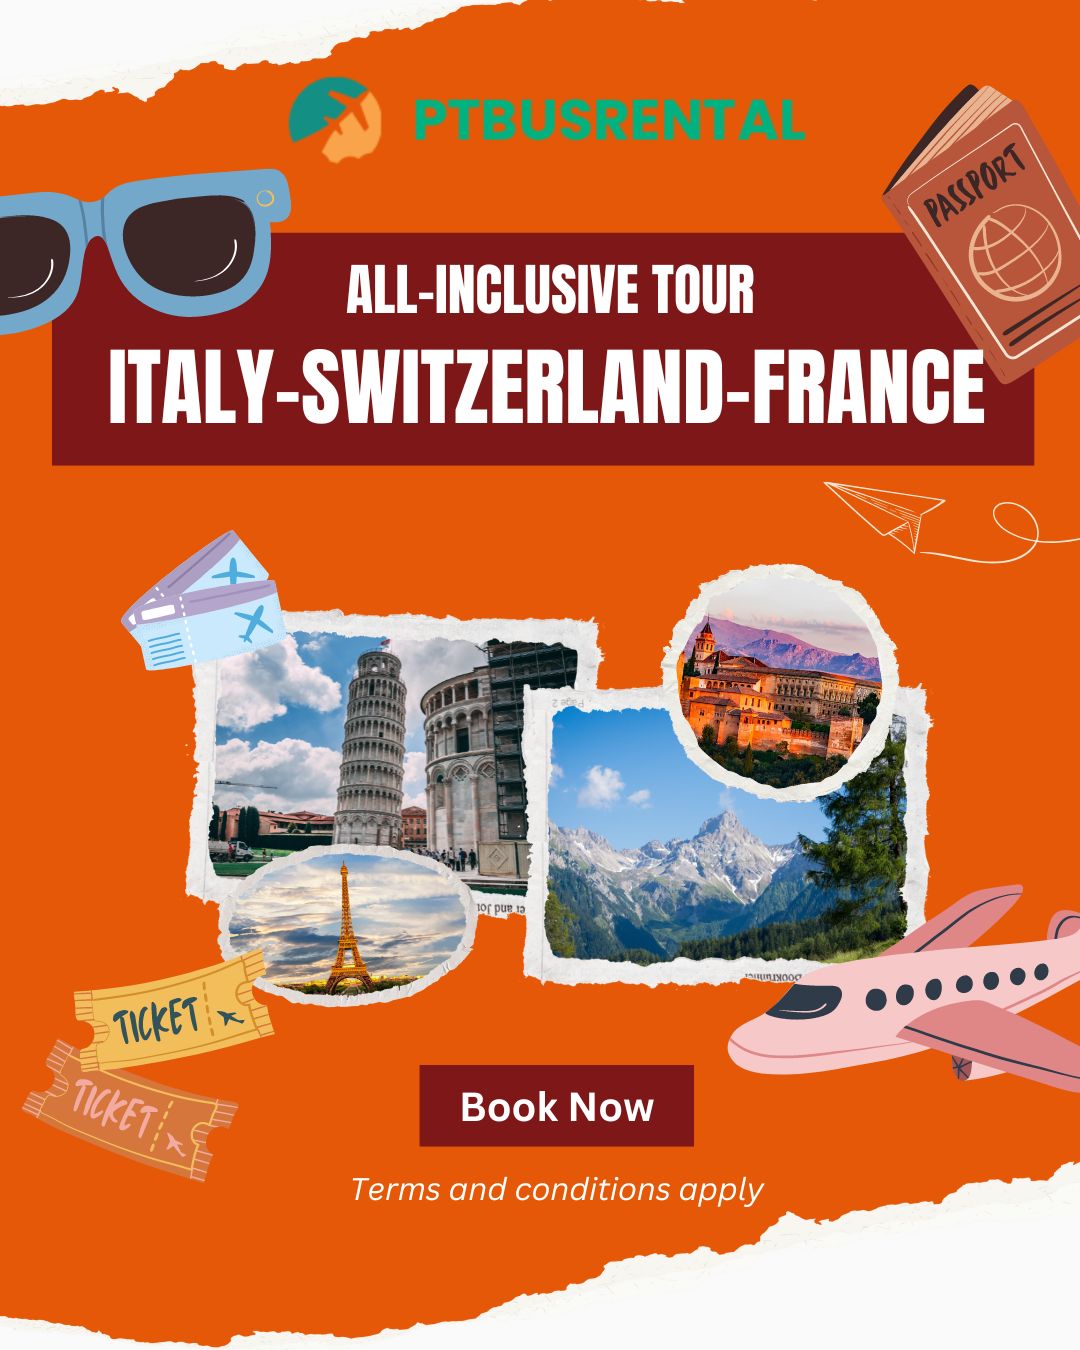 Europe Vacation Packages: All-inclusive Tour Italy-Switzerland-France